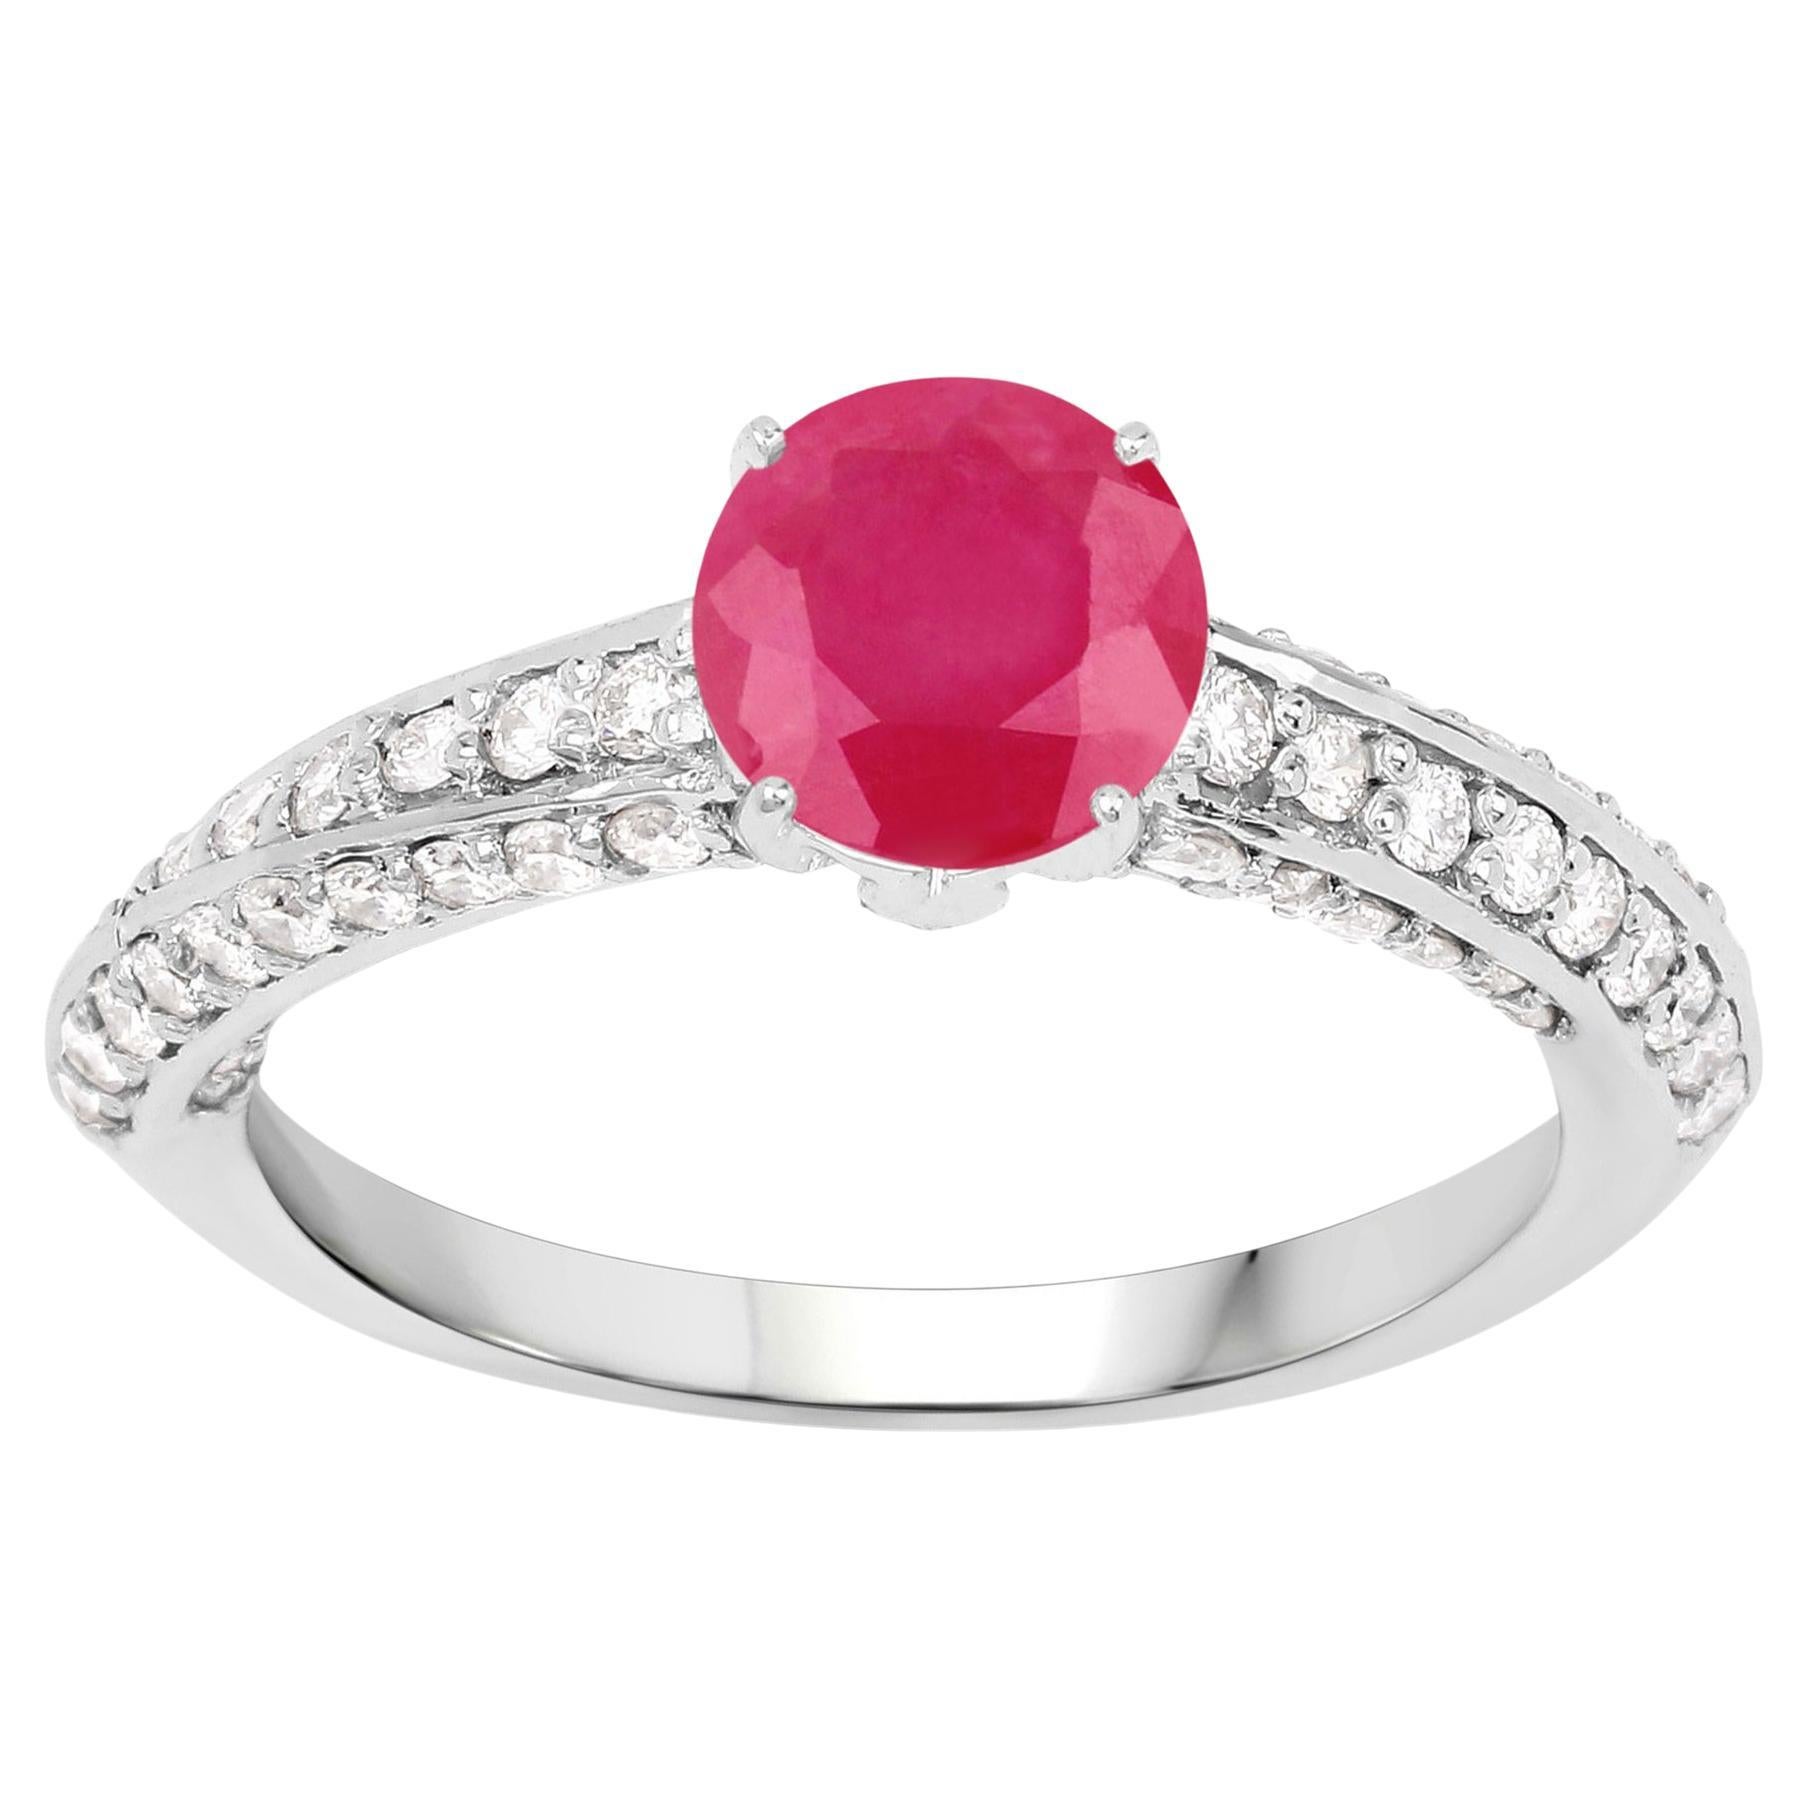 It comes with the appraisal by GIA GG/AJP
All Gemstones are Natural  
Round Cut Ruby = 0.90 Carat
64 Round Diamond = 0.60 Carats
Metal: 14K White Gold
Ring Size: 7* US
*It can be resized complimentary